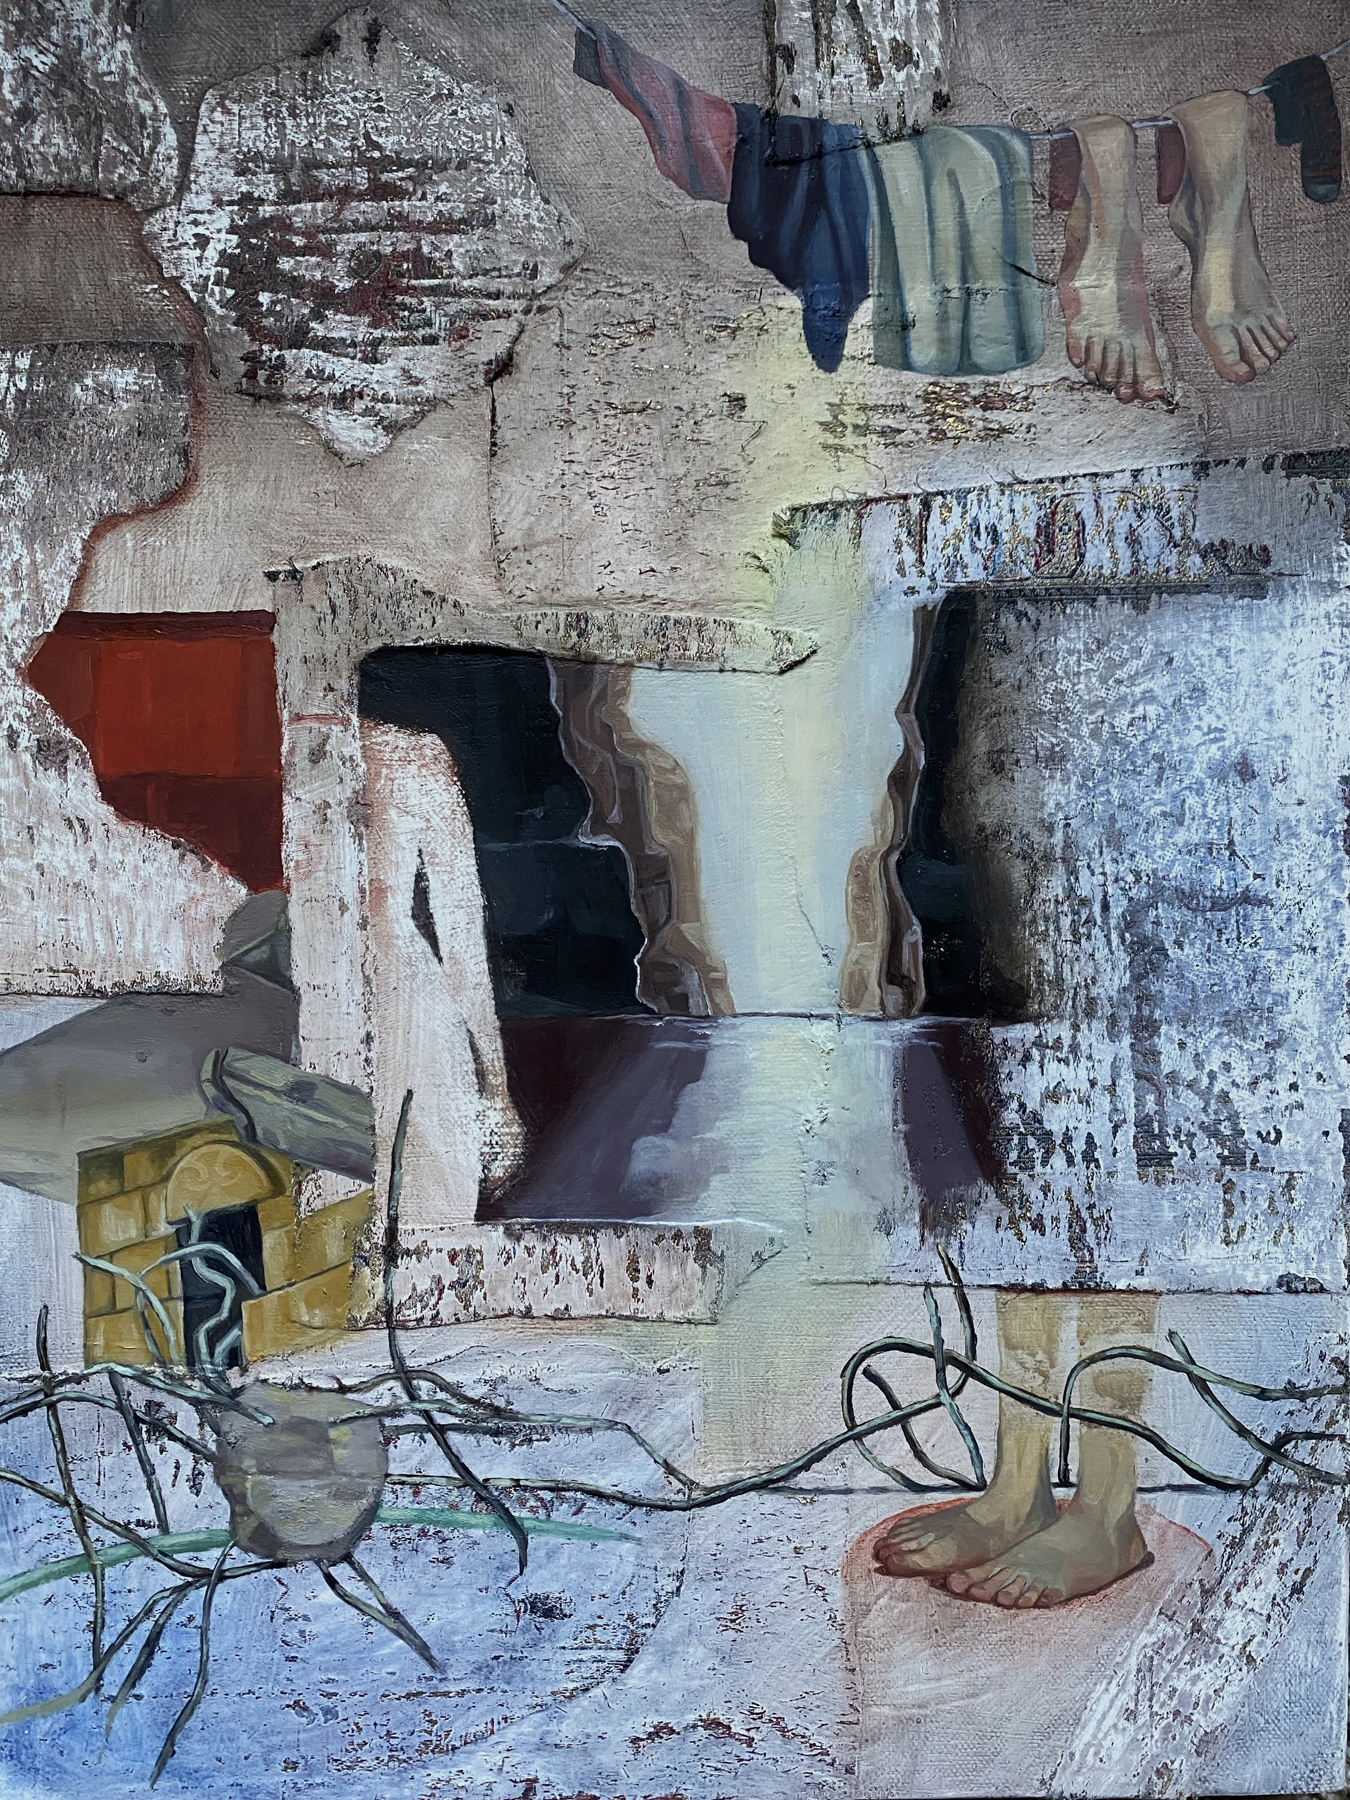 A mixed-media collage depicts concrete ruins; garments and two bare feet resembling socks hang on a clothesline in the upper right and two bare feet stand wrapped in wires in the lower right